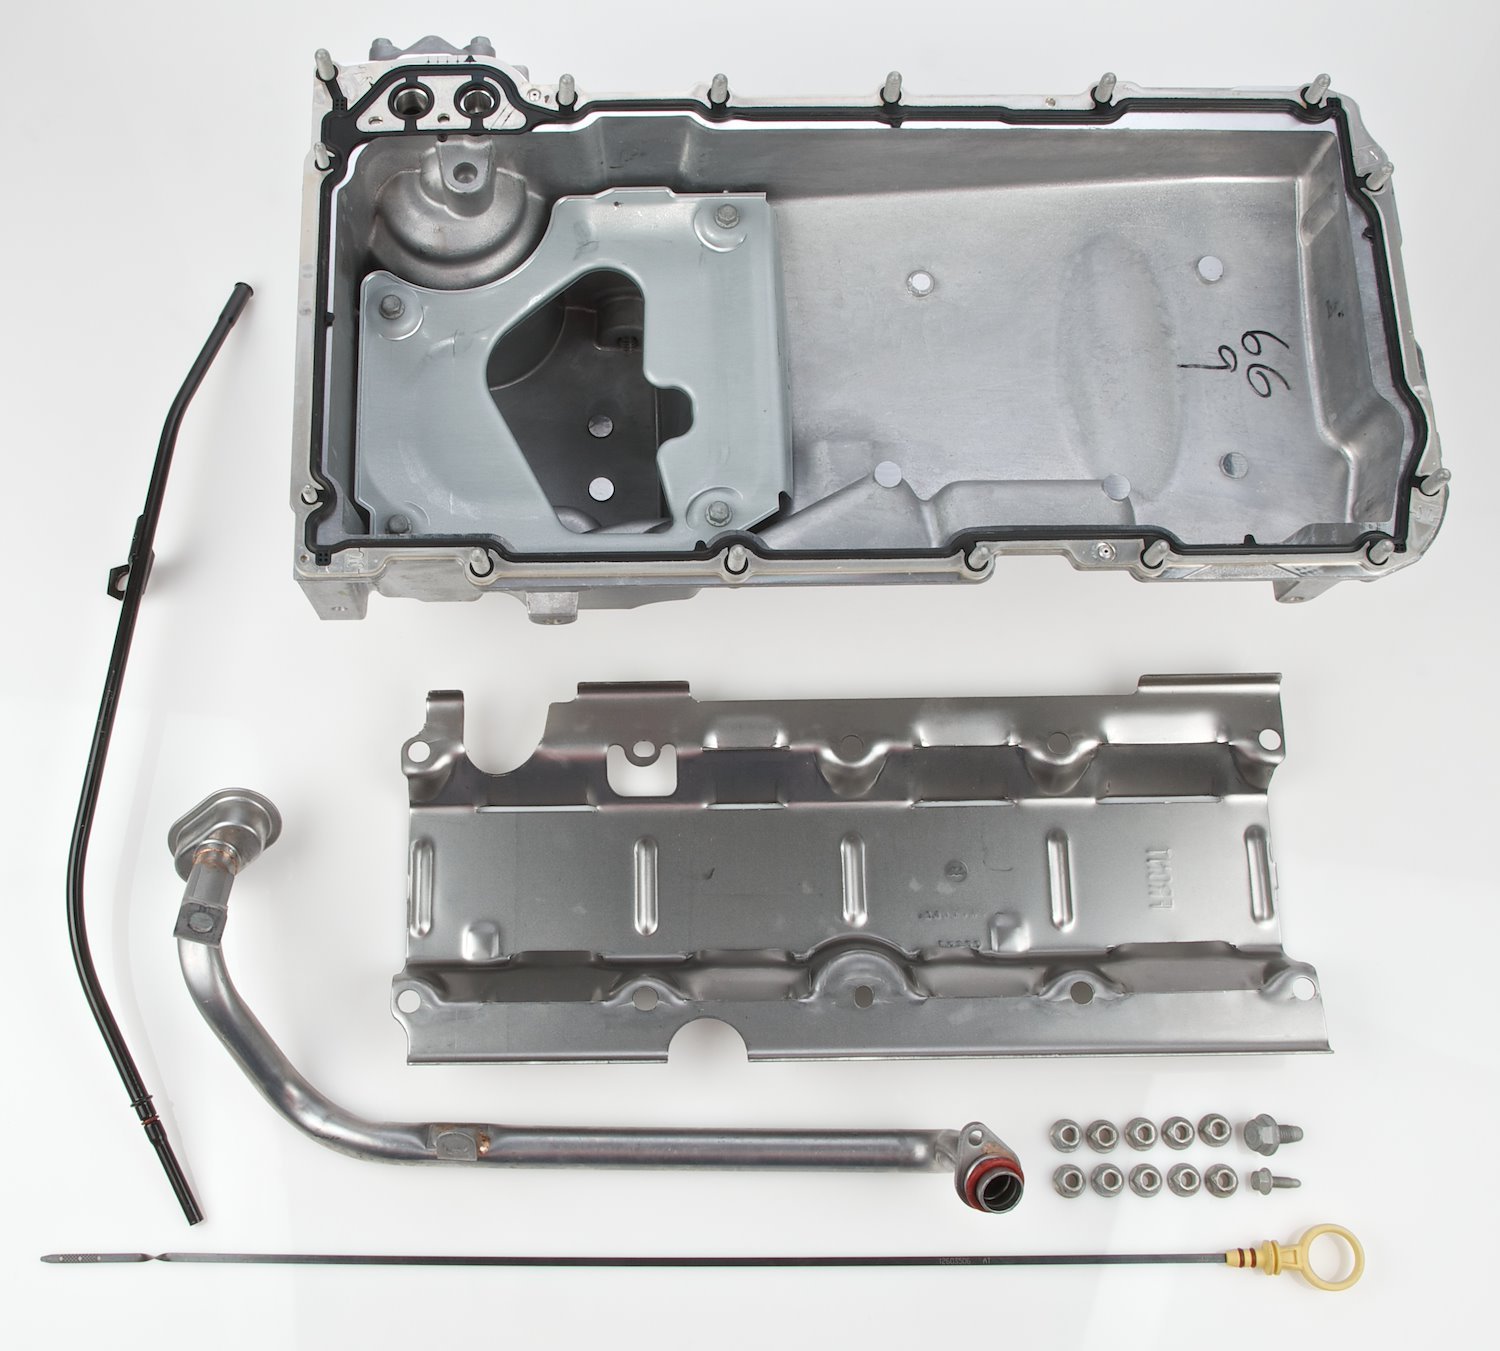 19212593 Muscle Car Oil Pan Kit for GM Gen III/IV LS Engine Swaps